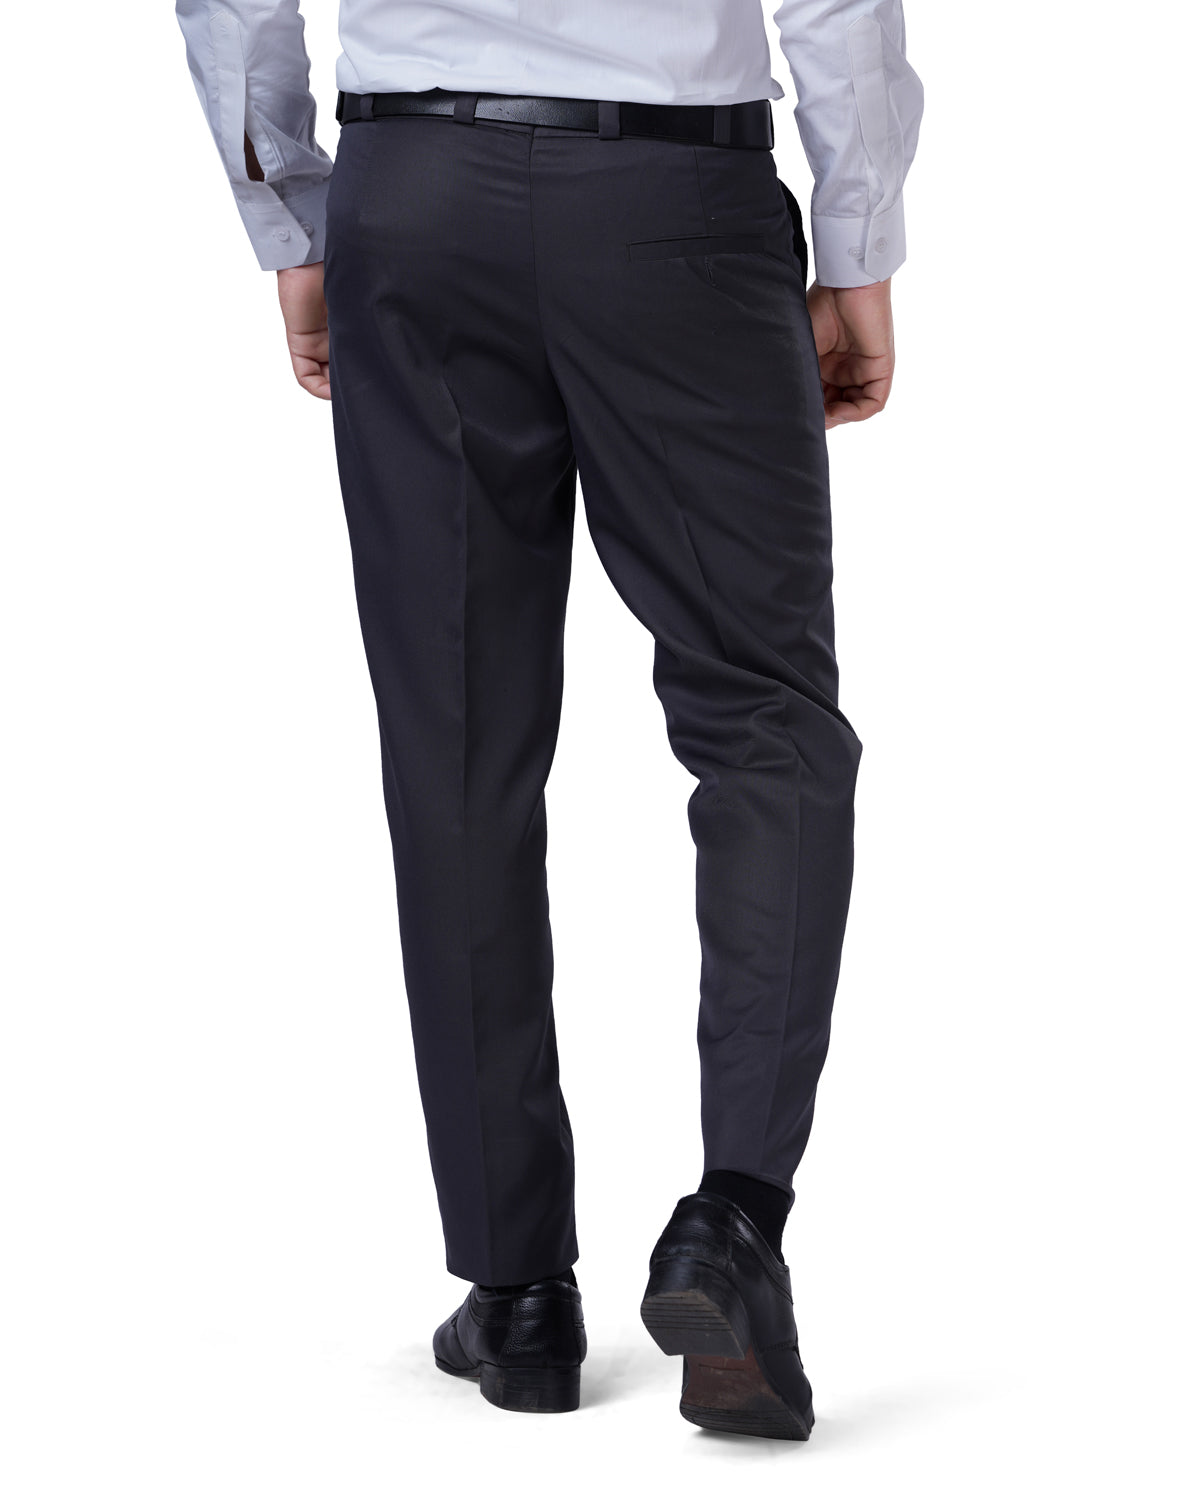 Buy Seal Grey Formal Trousers For Men Online @ Best Prices in India |  UNIFORM BUCKET